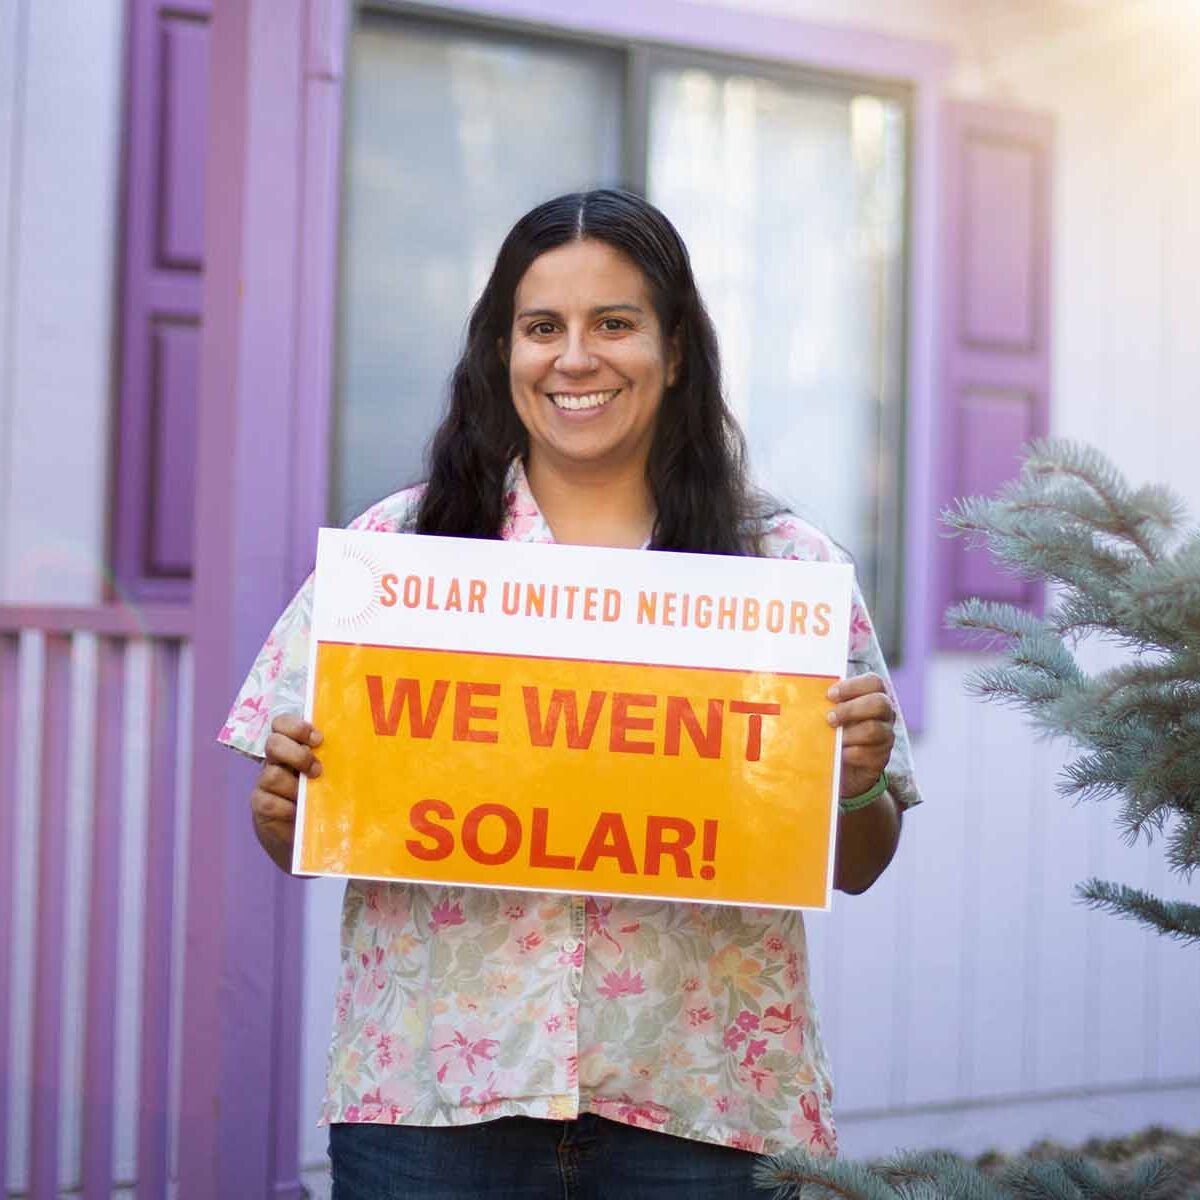 Woman holding "We went solar" sign, smiling, and standing in front of a purple house.